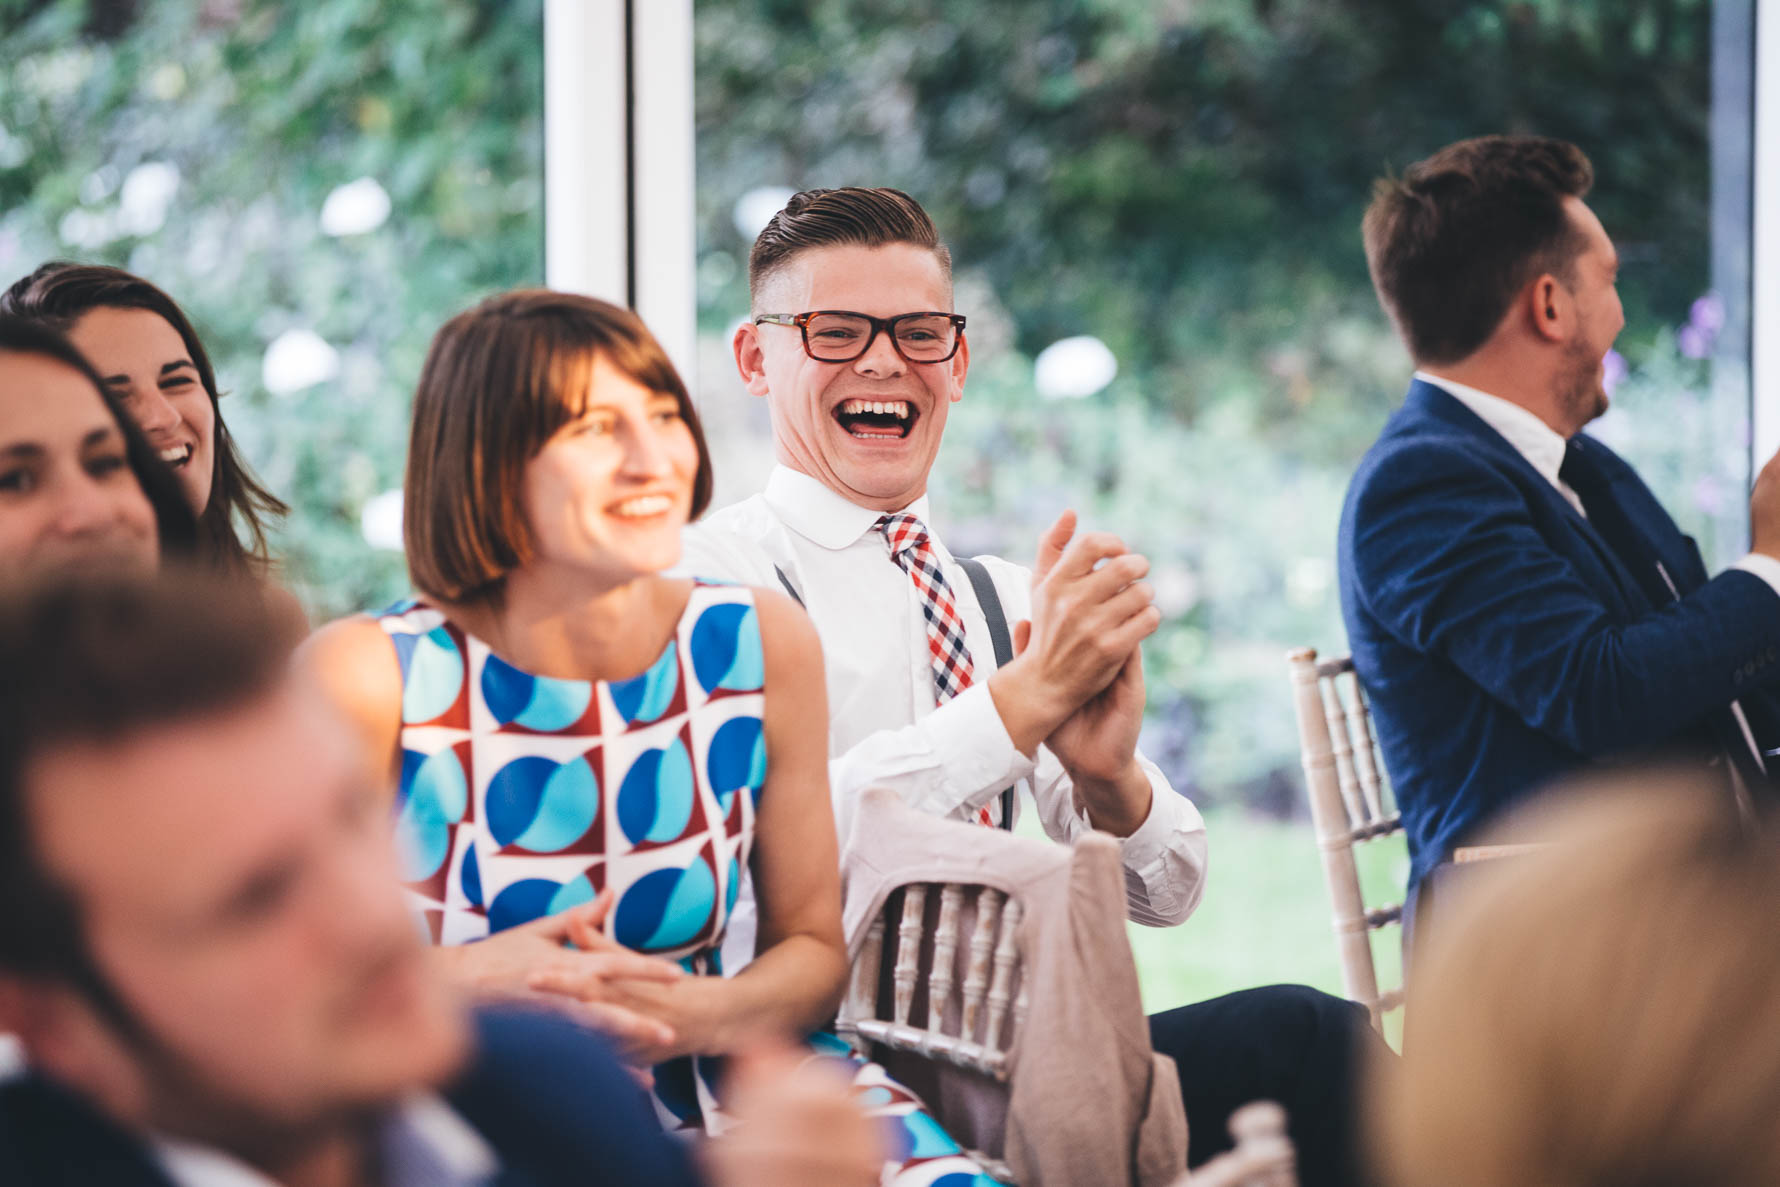 Make wedding guest wearing glasses sat clapping with a large smile on his face surrounded by other wedding guests also smiling